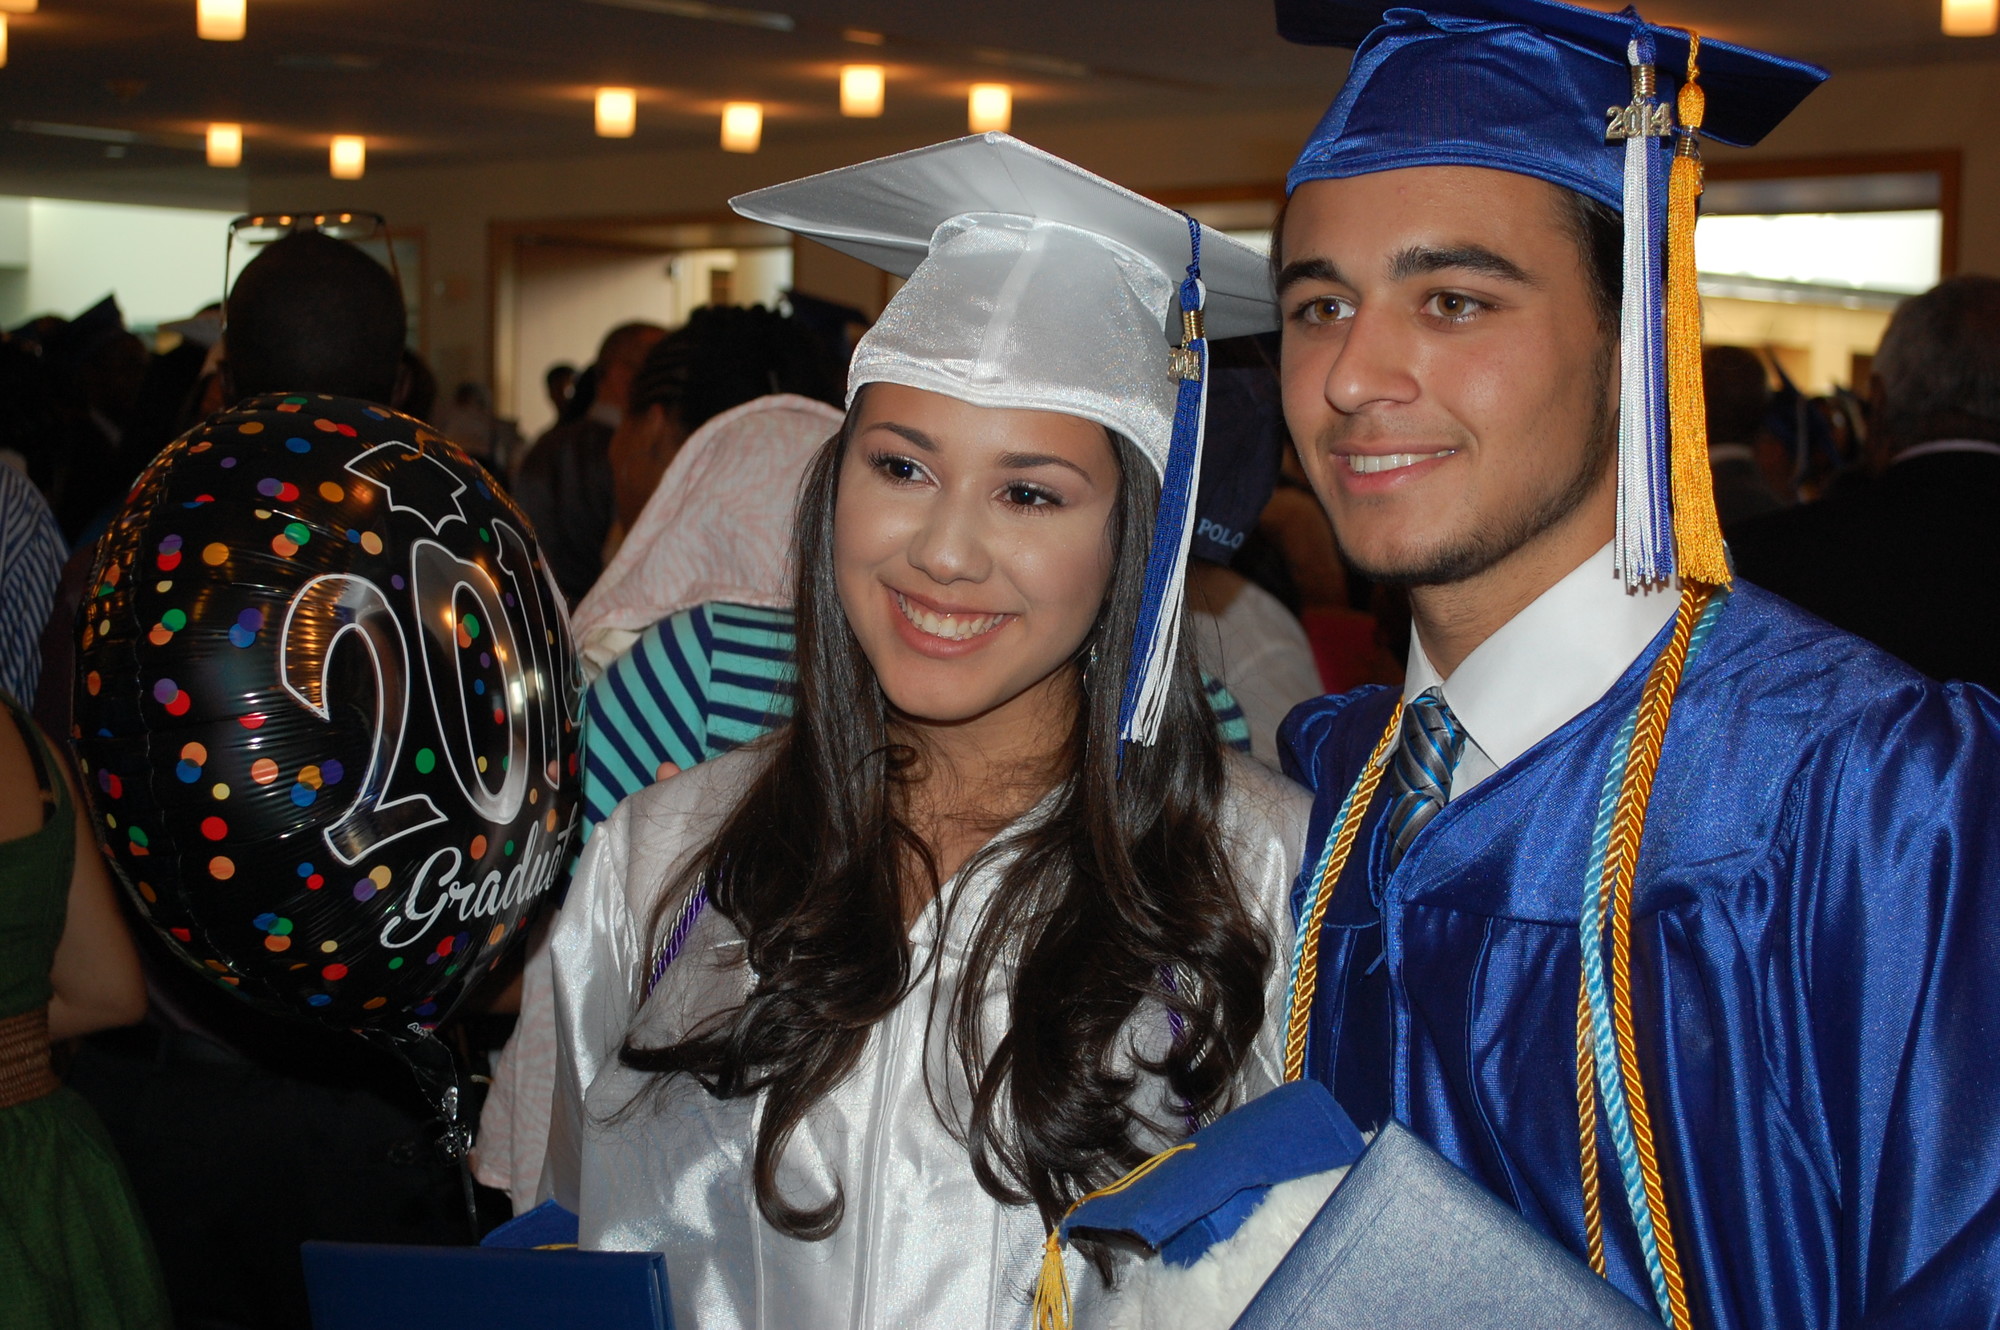 Elizabeth Espinal and Nicholas Bizzarro met up in the Tilles Center lobby after receiving their diplomas at Central High School’s 88th commencement ceremony.